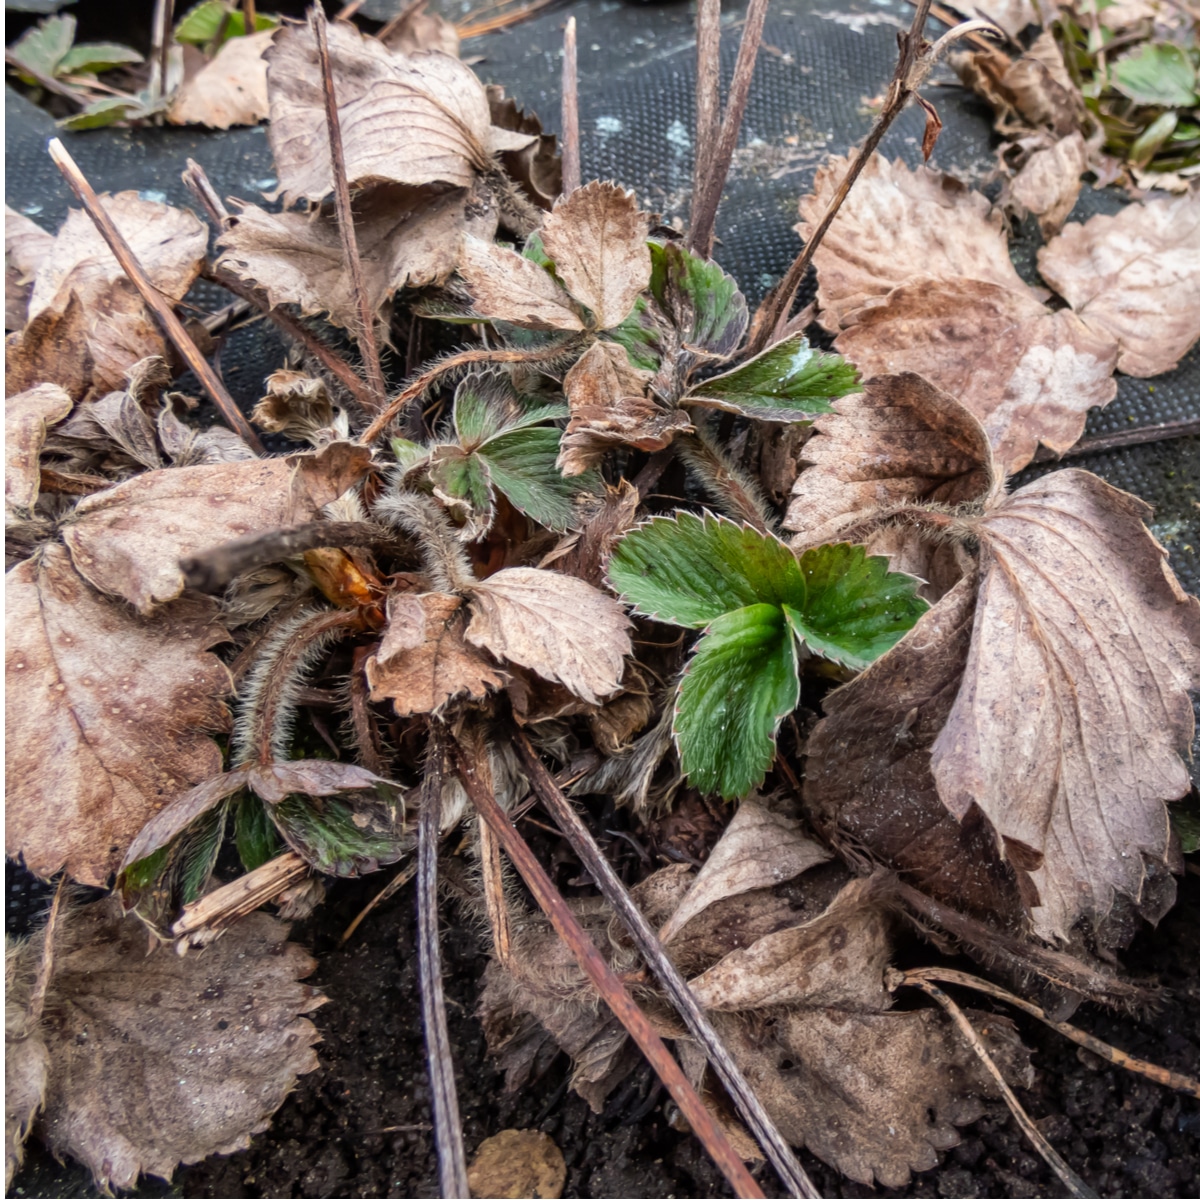 Strawberry Plants Dying from Crown Rot 